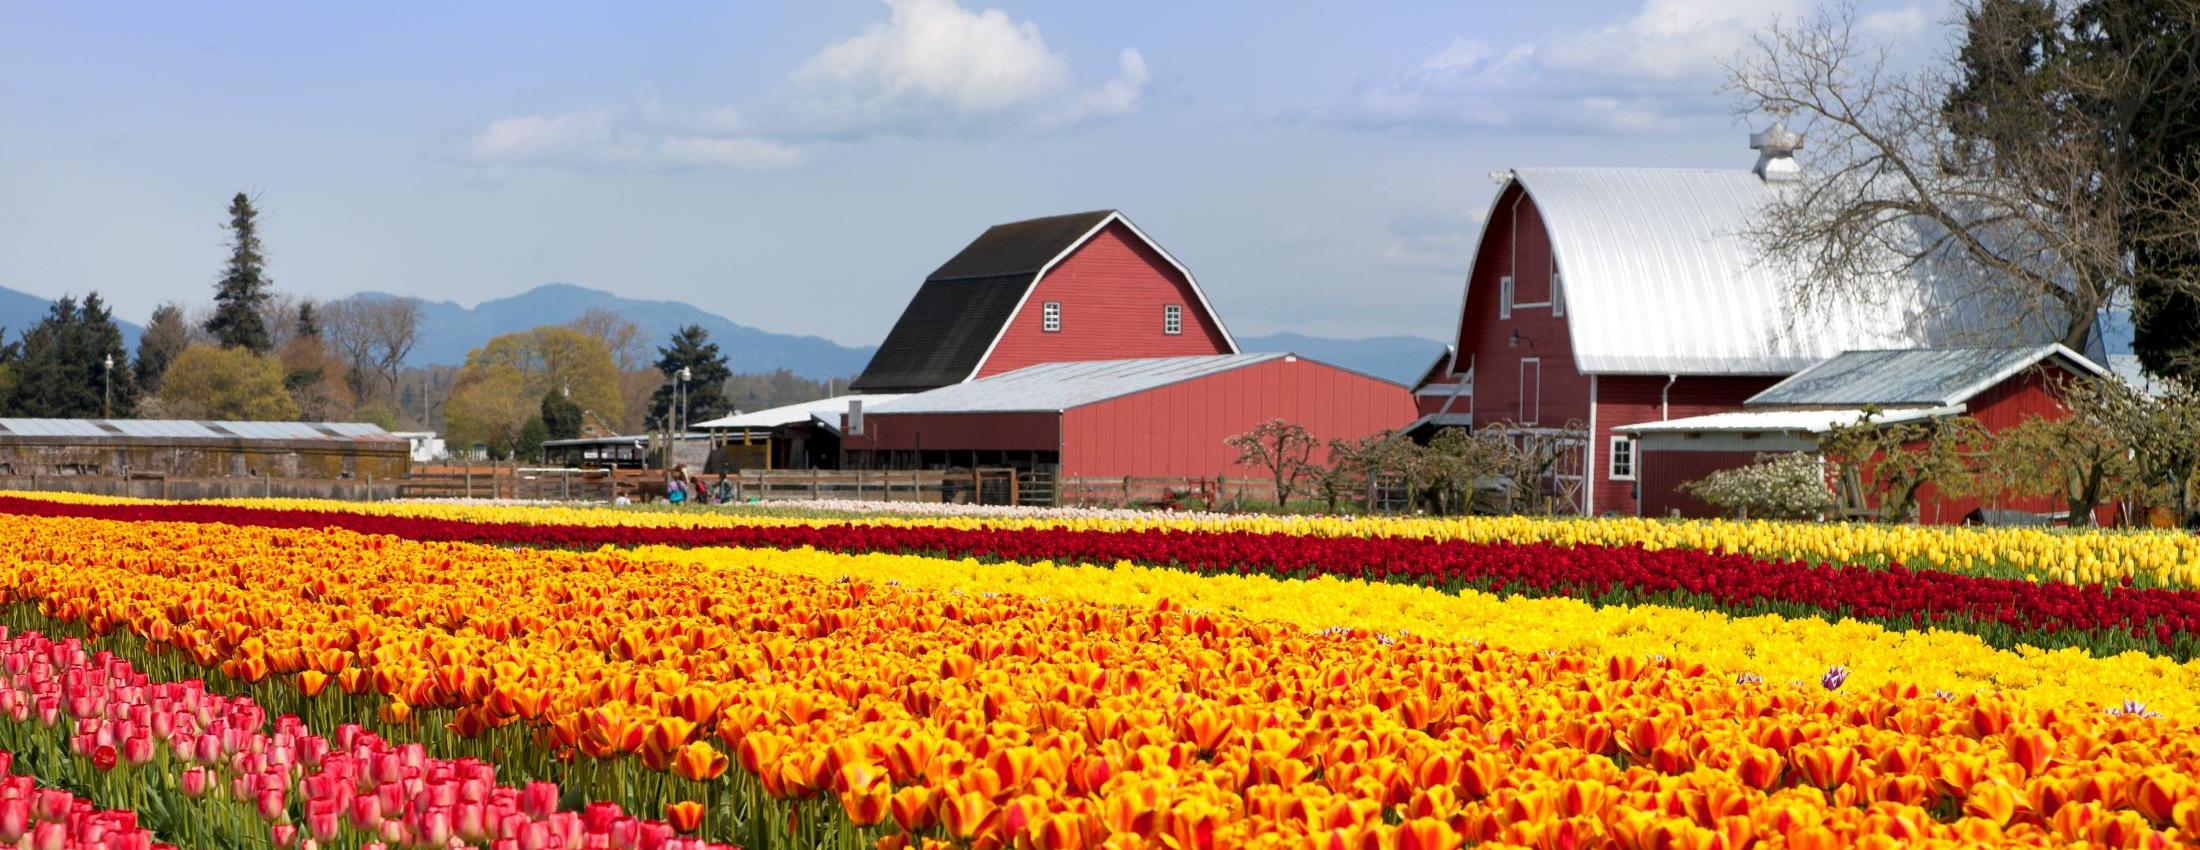 Tulip farm with red, orange, and yellow tulips, and red barns in distance. Skagit Valley, Washington.